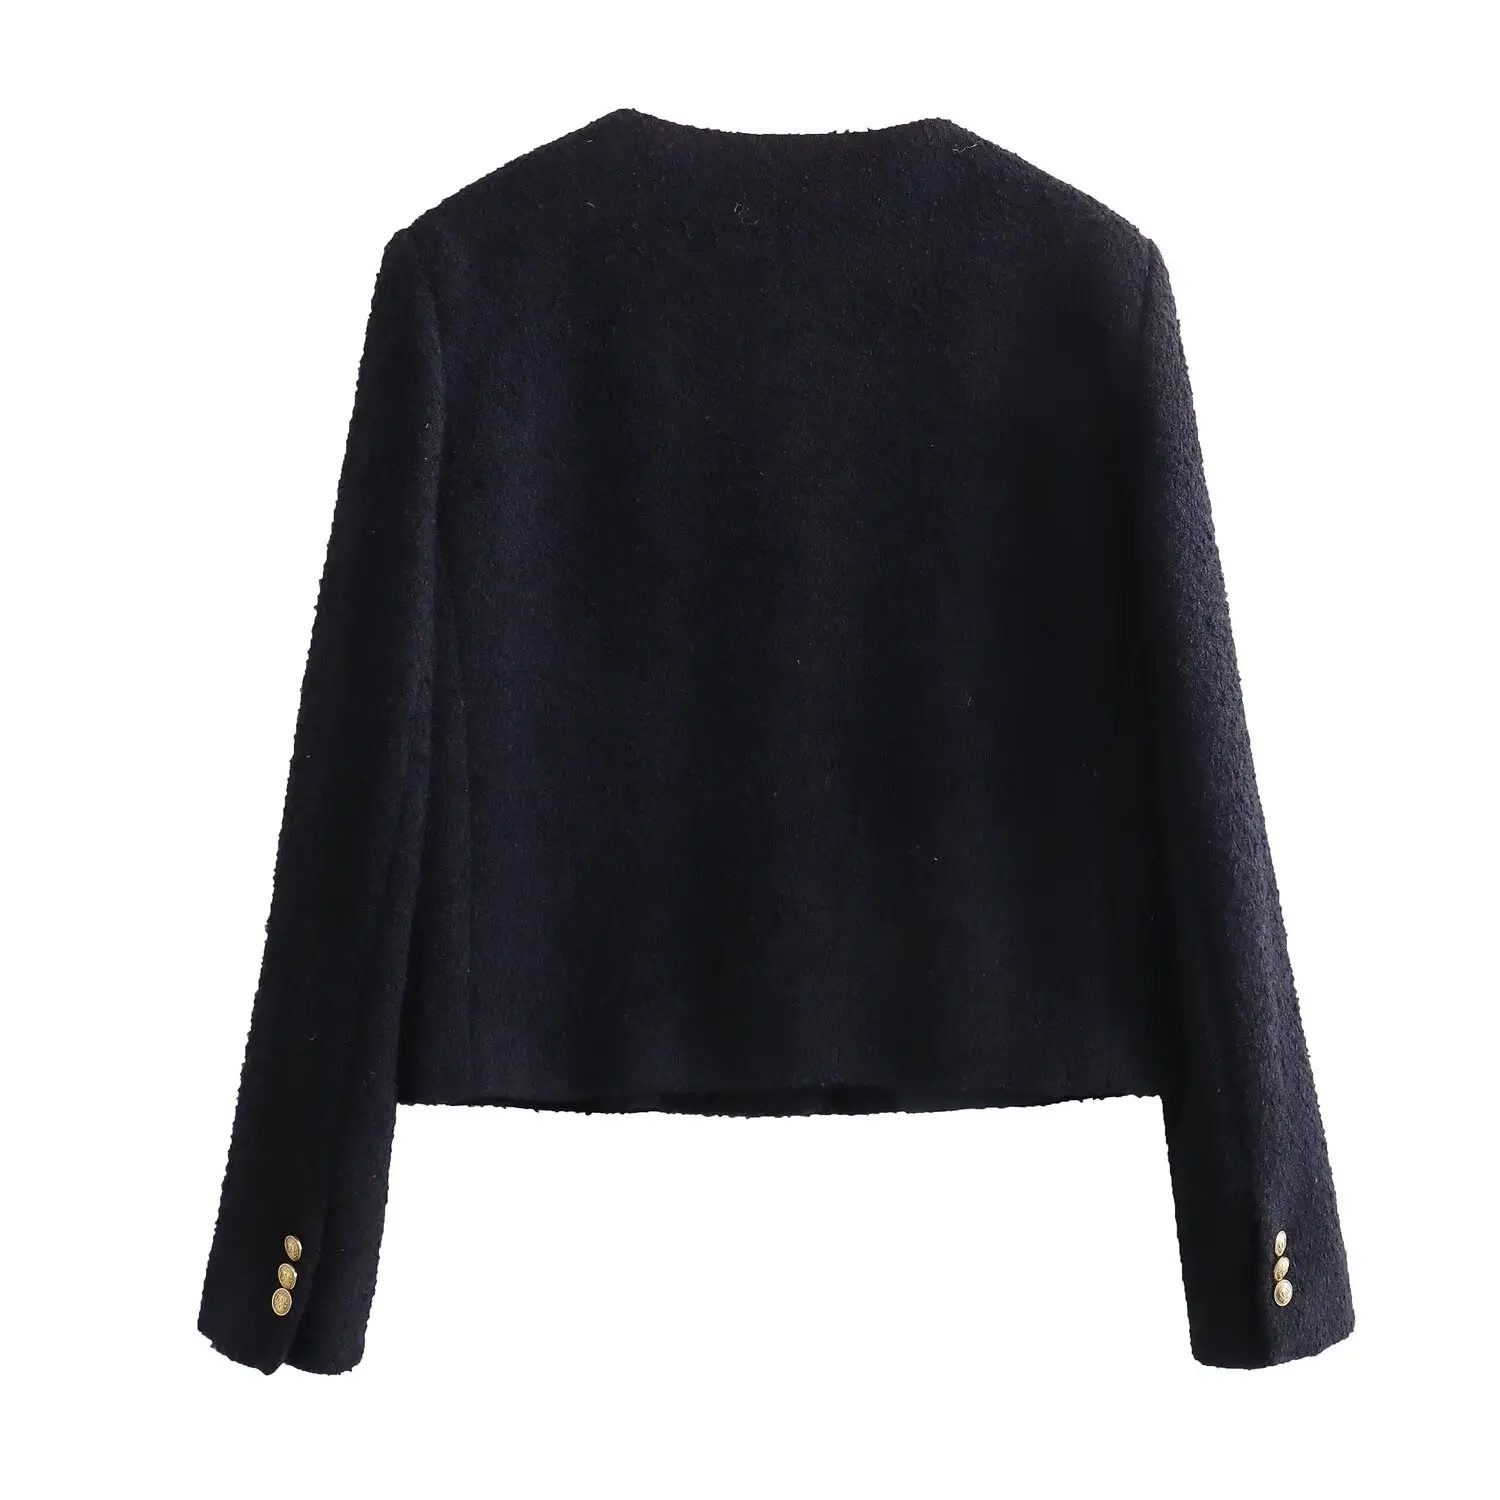 Withered Vintage Gold Buttons Casual WInter Woolen Jacket Coat Women Tops French Elegant Chenille Navy